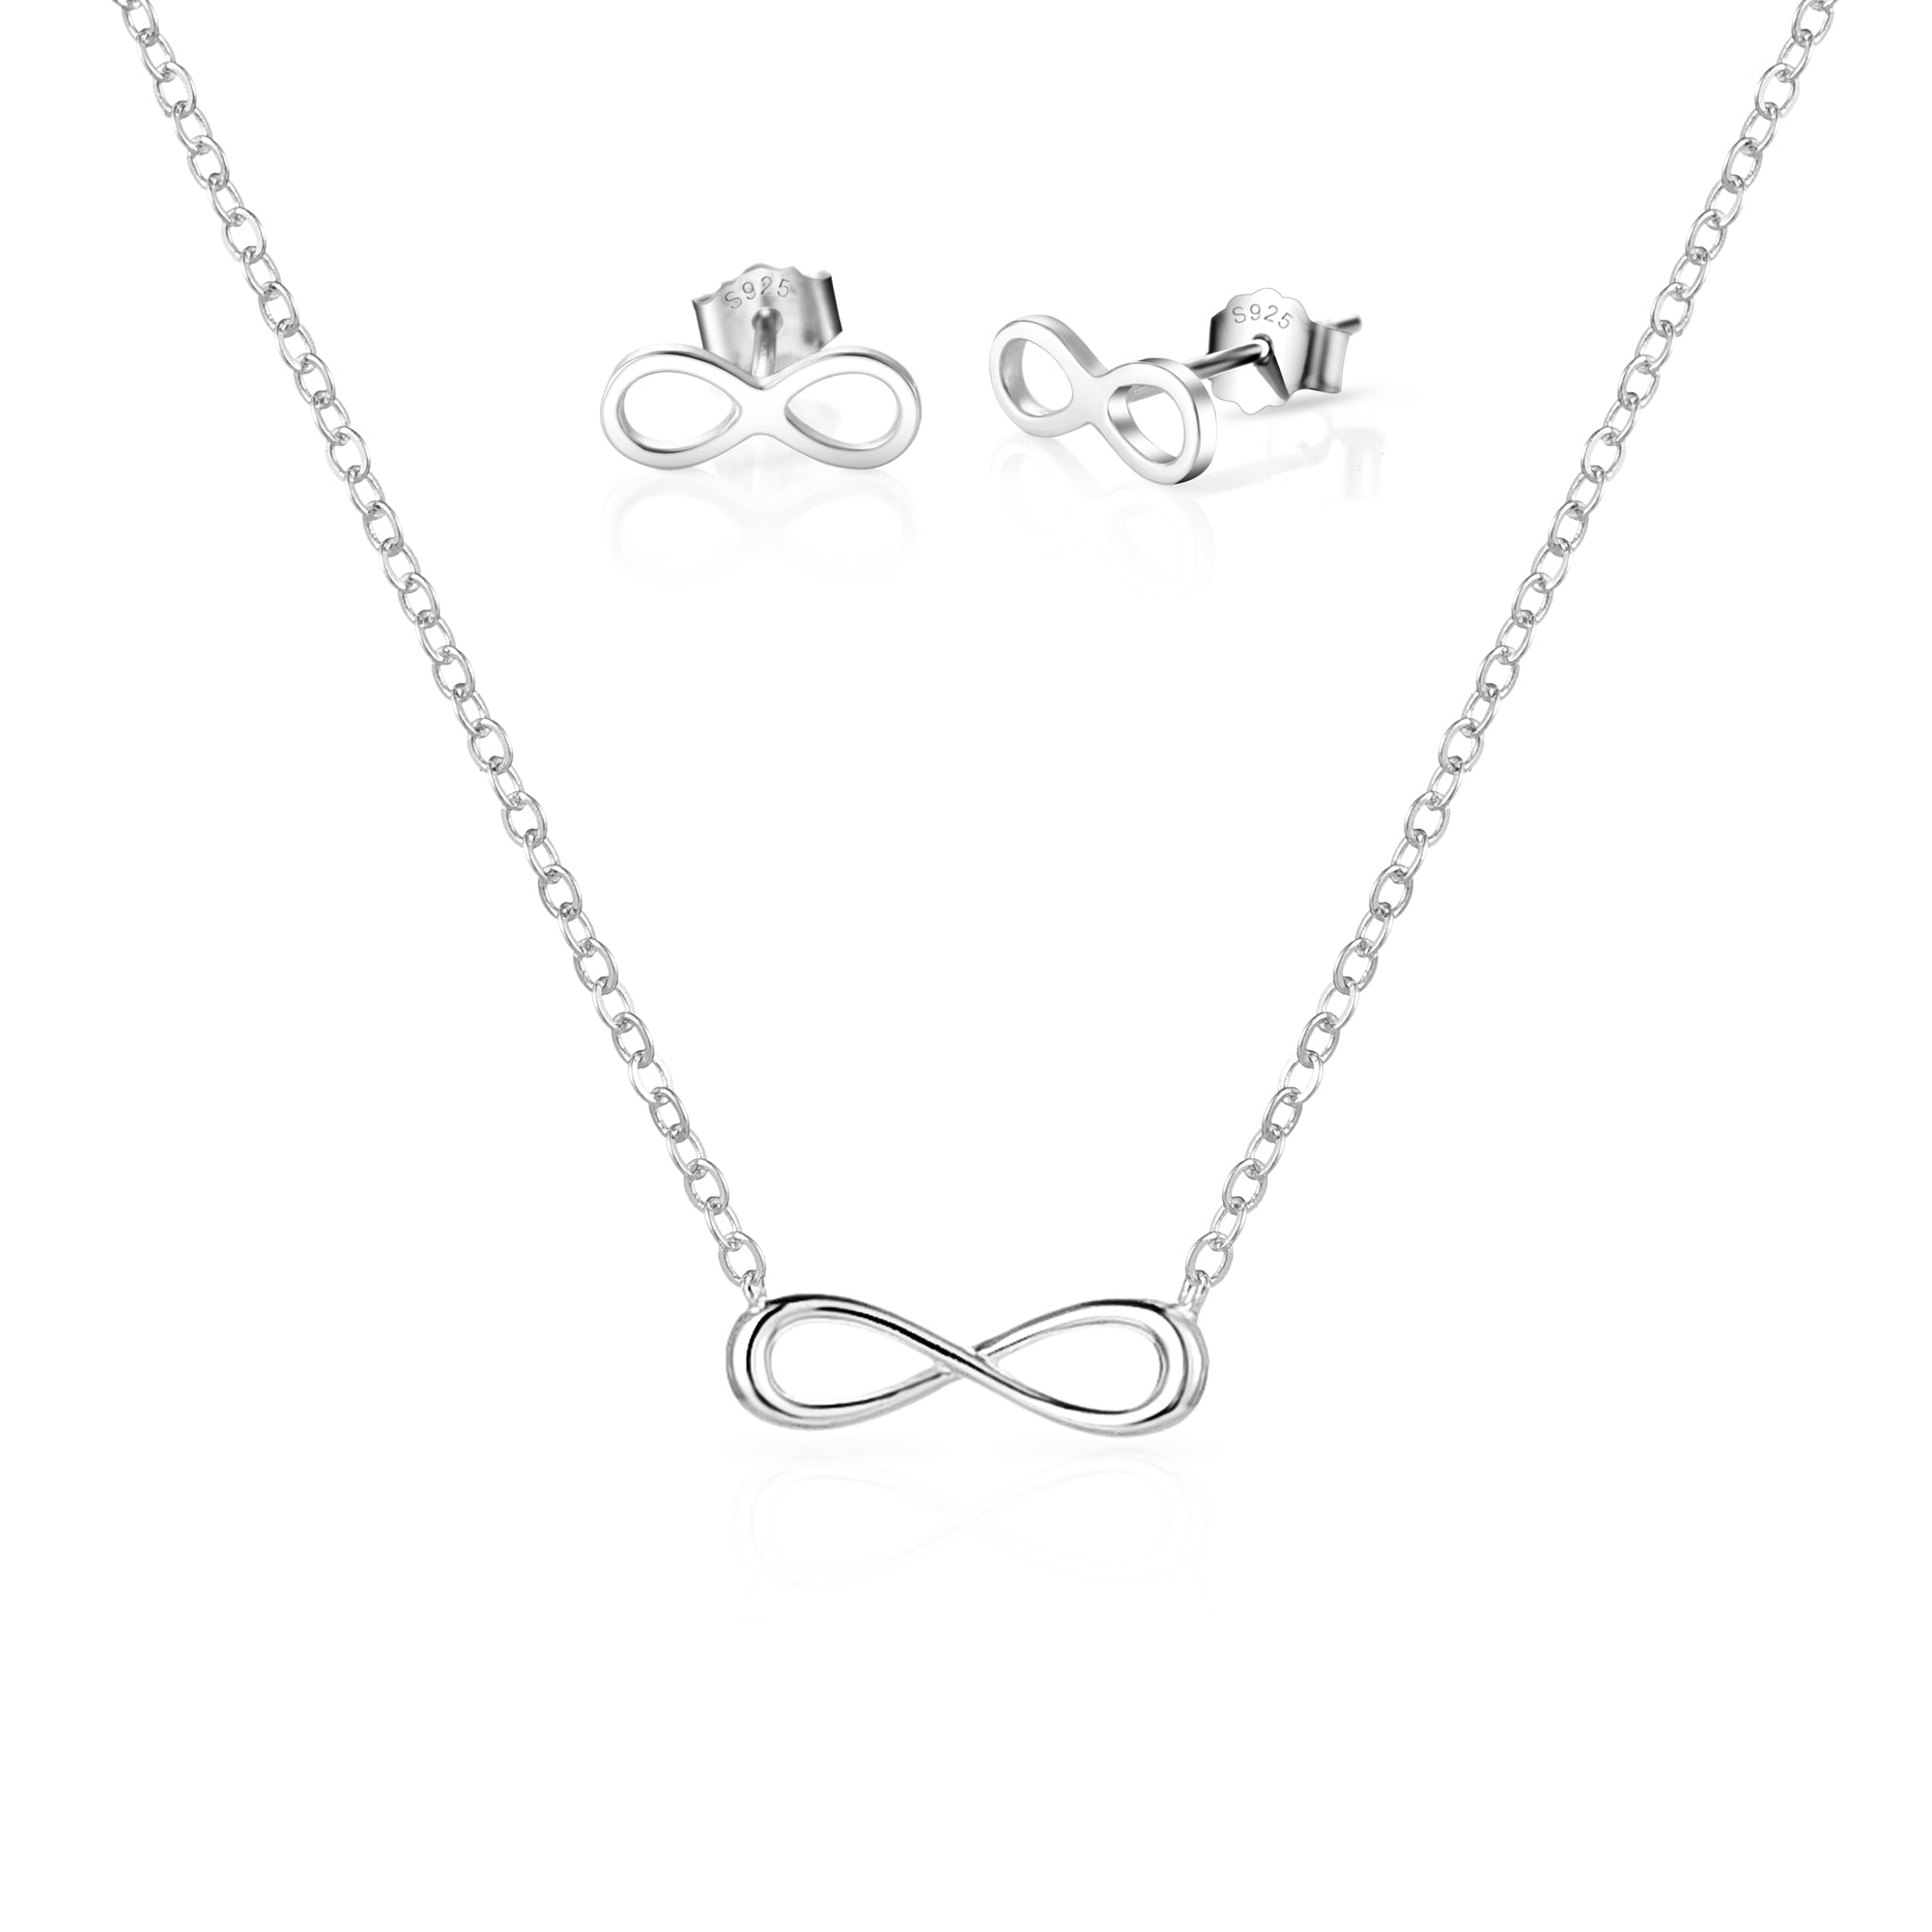 Sterling Silver Infinity Friendship Quote Set